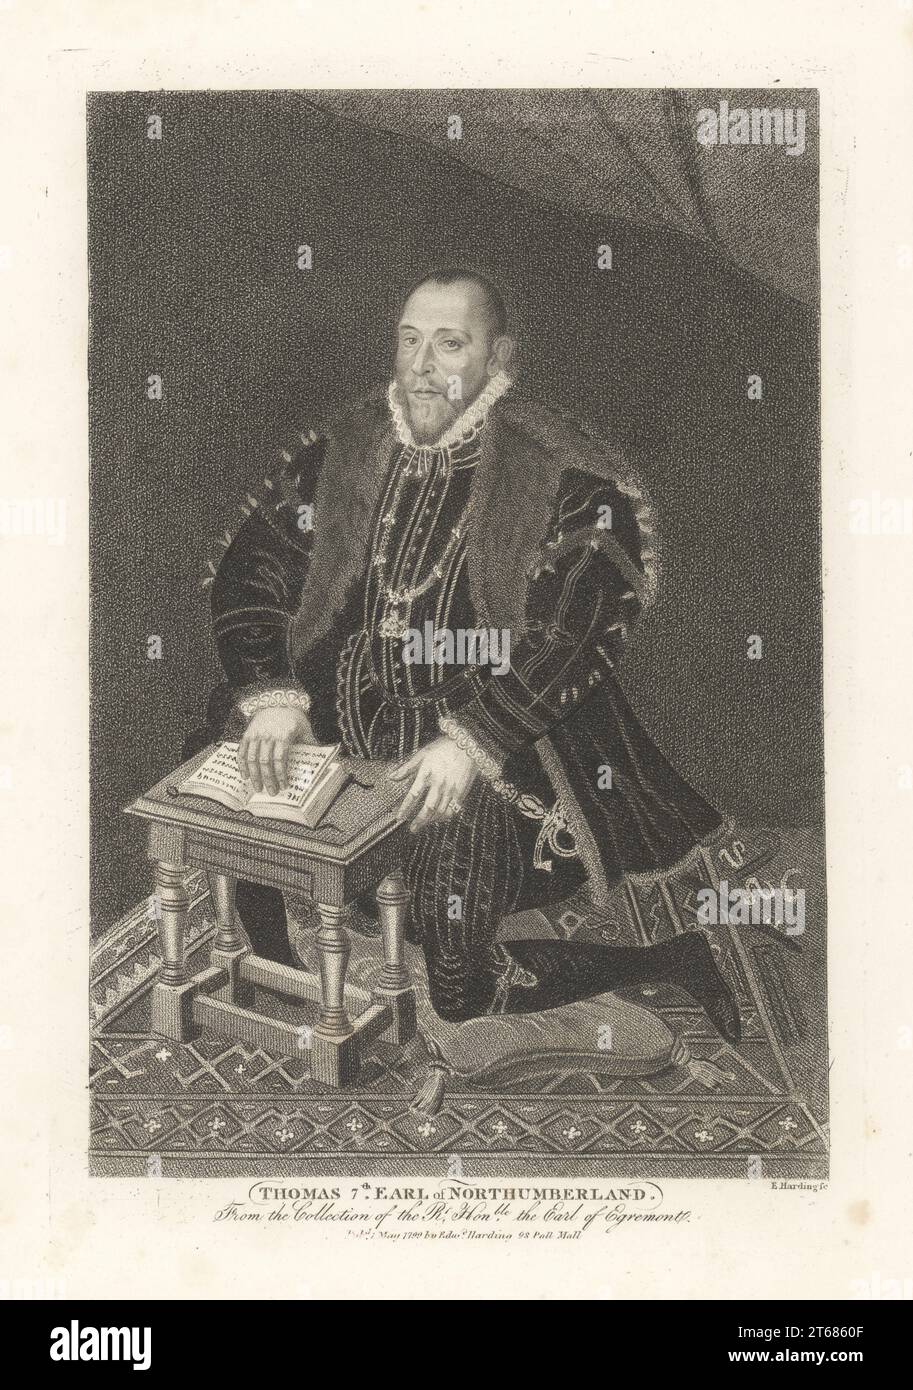 Thomas Percy, 7th Earl of Northumberland, kneeling on a cushion, wearing a black doublet with a fur trimmed cloak, a white ruff and the Order of the Garter collar and garter, court sword, reading a prayer book. Thomas, 7th Earl of Northumberland, executed for treason, 1528-1572. From a painting by Steven van der Meulen in Earl Egremont's collection at Petworth House, West Sussex. Copperplate engraving by Edward Harding from John Adolphus The British Cabinet, containing Portraits of Illustrious Personages, printed by T. Bensley for E. Harding, 98 Pall Mall, London, 1799. Stock Photo